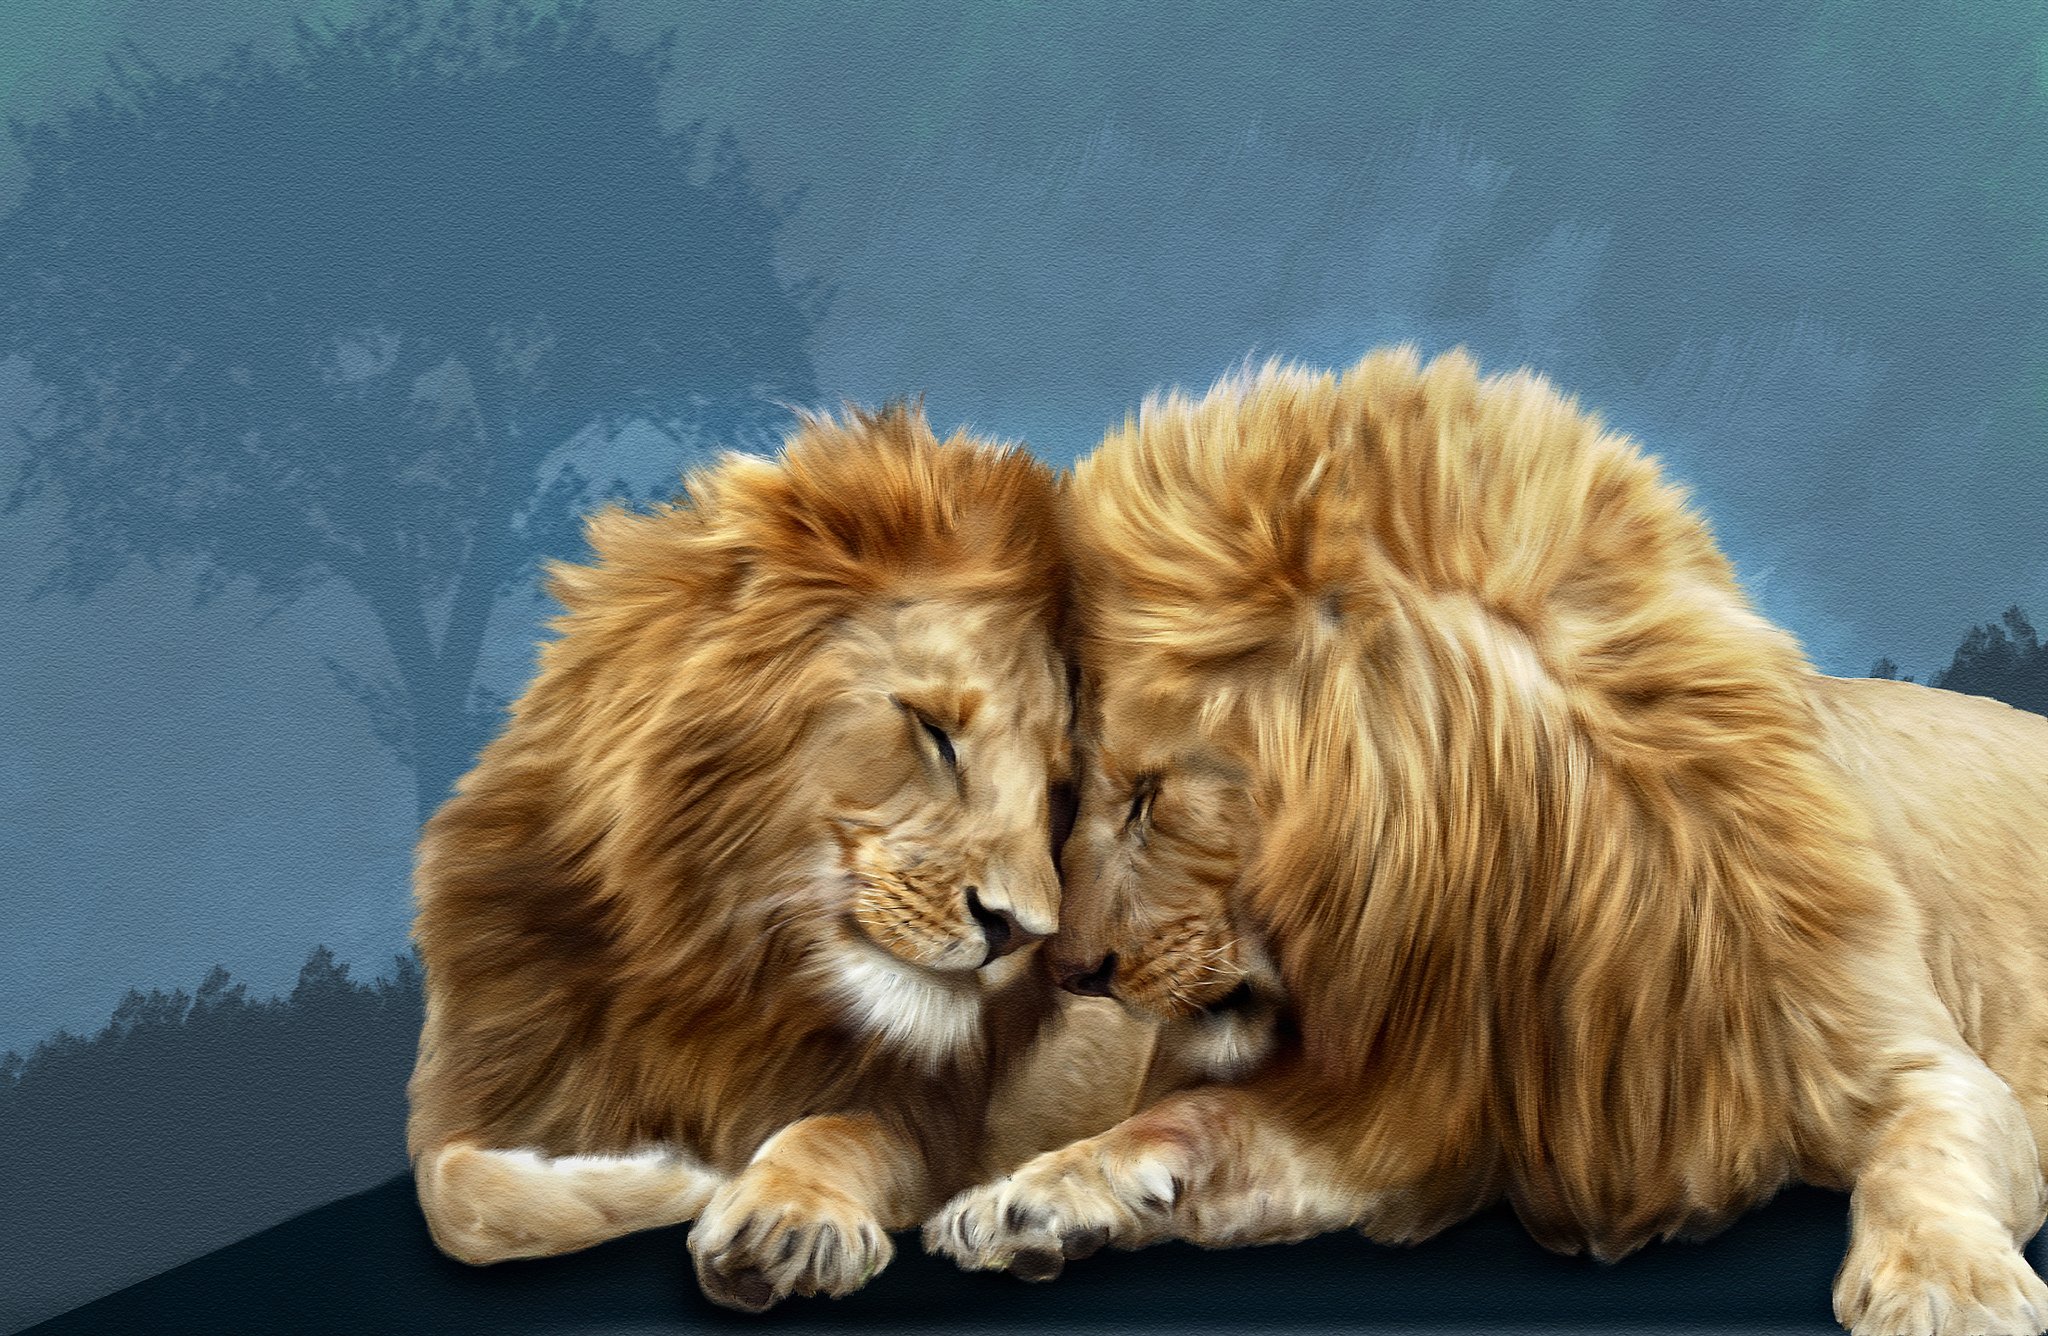 big, Cats, Lions, Two, Animals, Lion Wallpaper